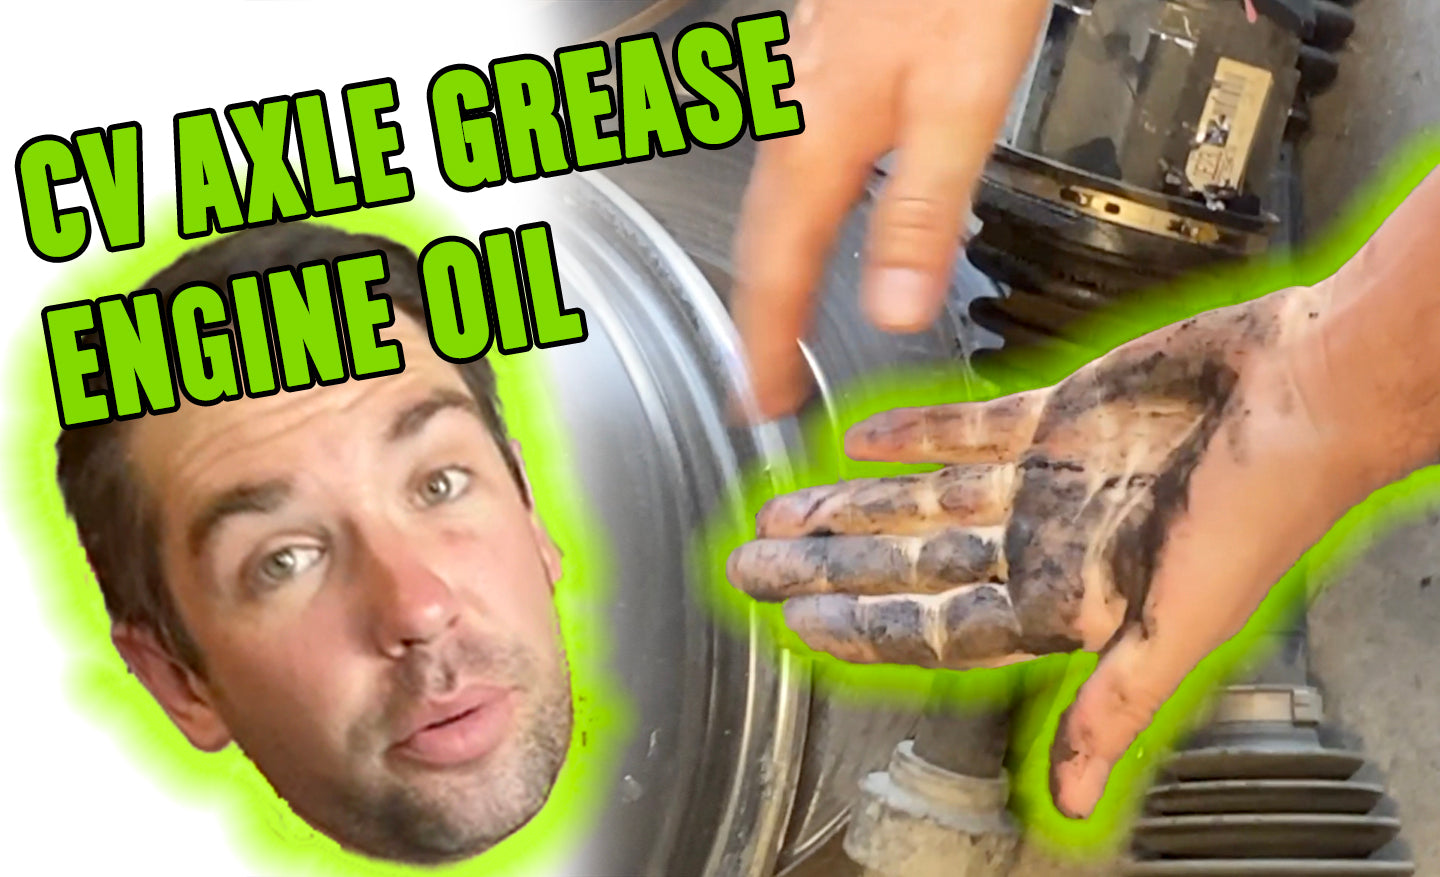 How To Get Grease Off Hands and Skin & Get Oil Off Hands